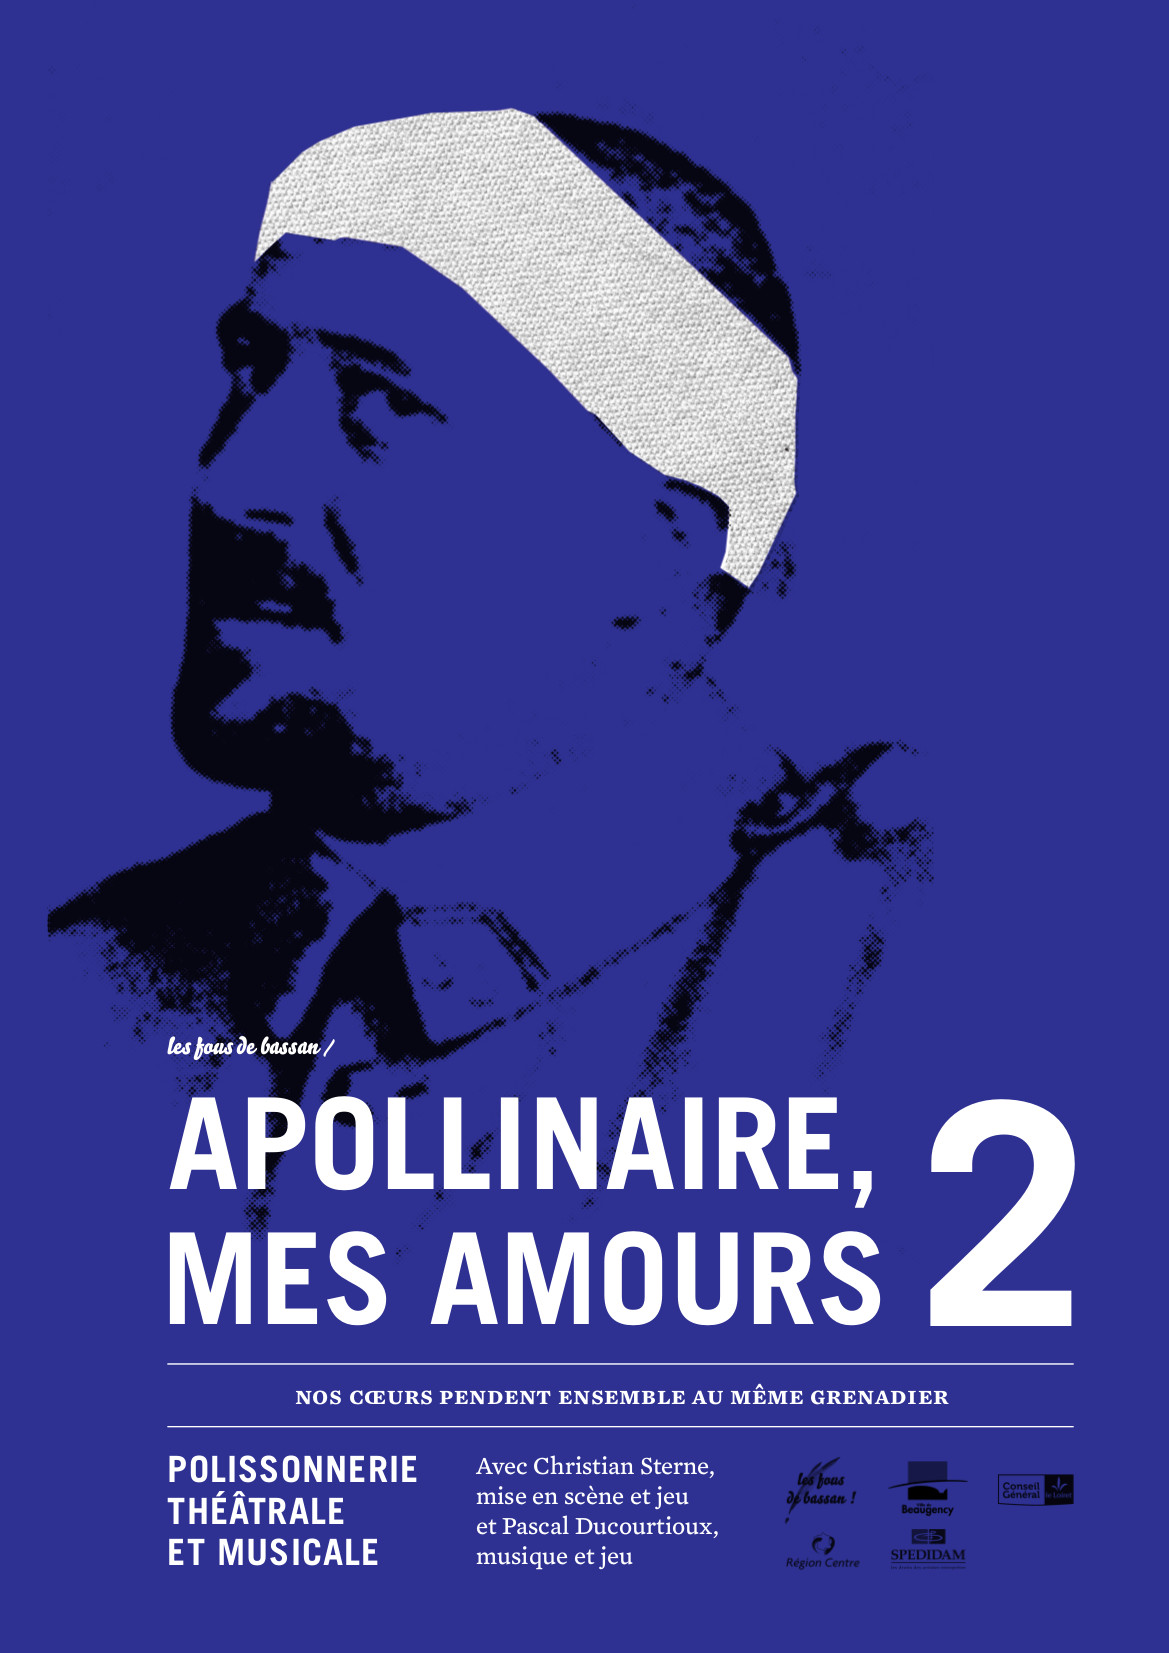 APOLLINAIRE MES AMOURS 2